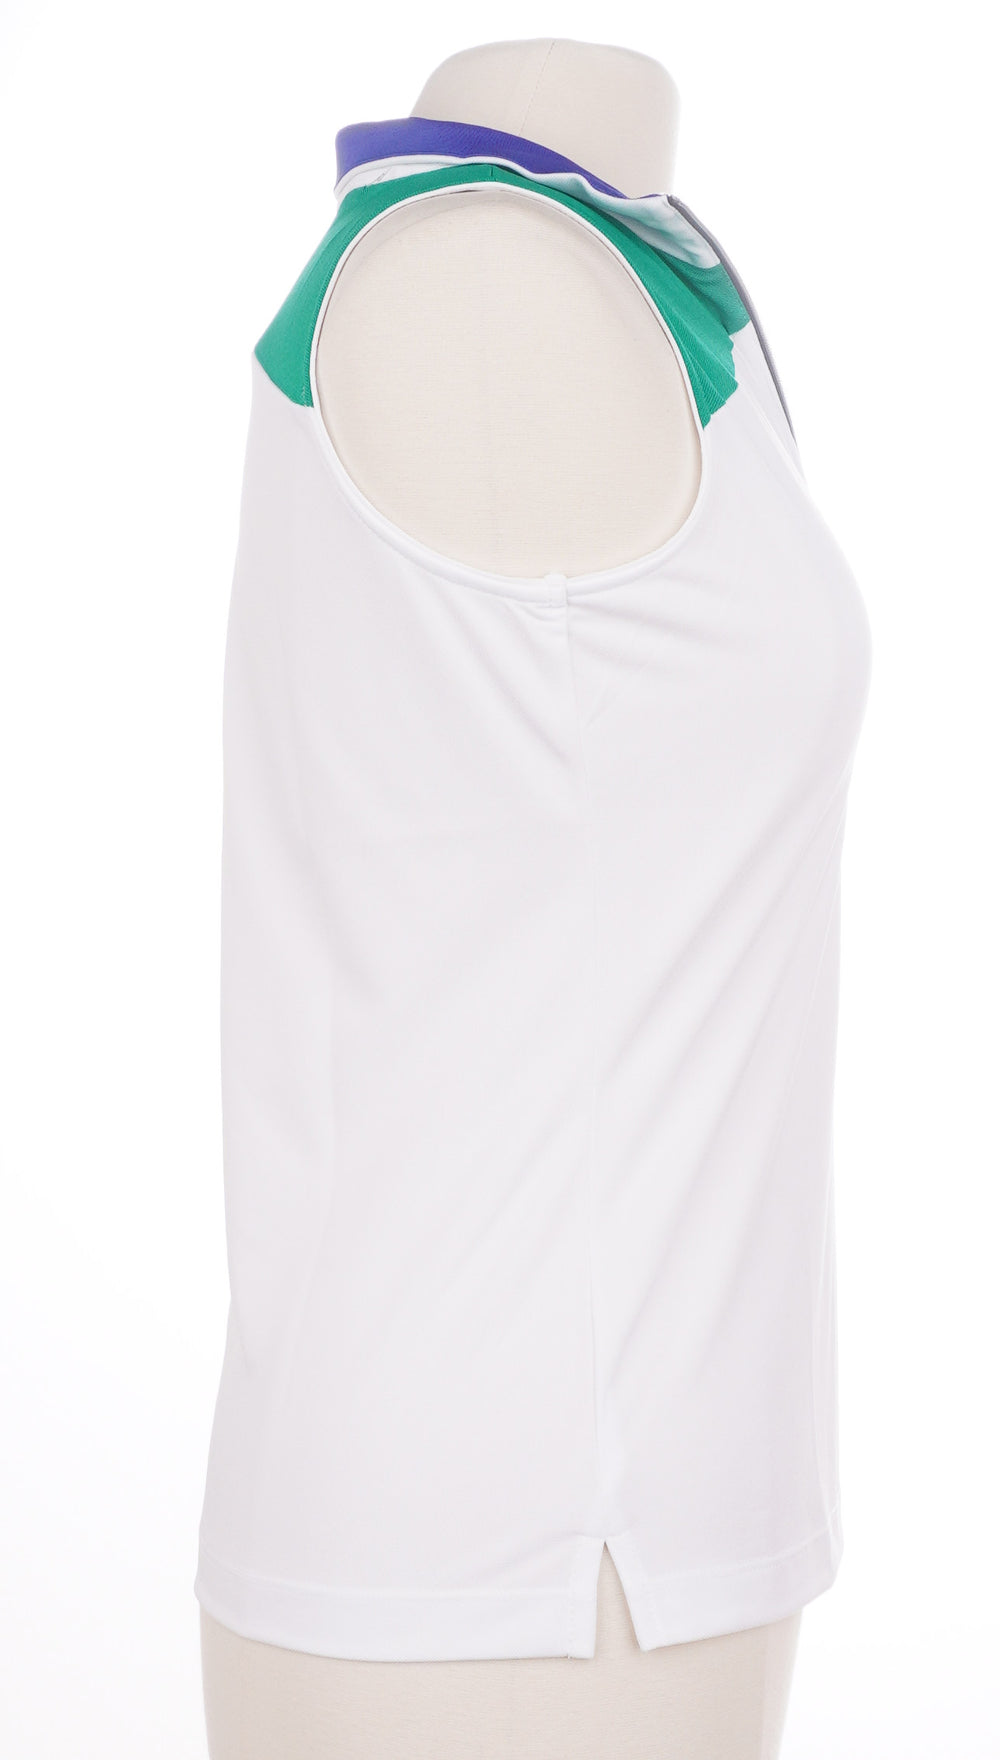 Tail Colorblock Sleeveless Top - White/Blue/Green - Size Small - Skorzie